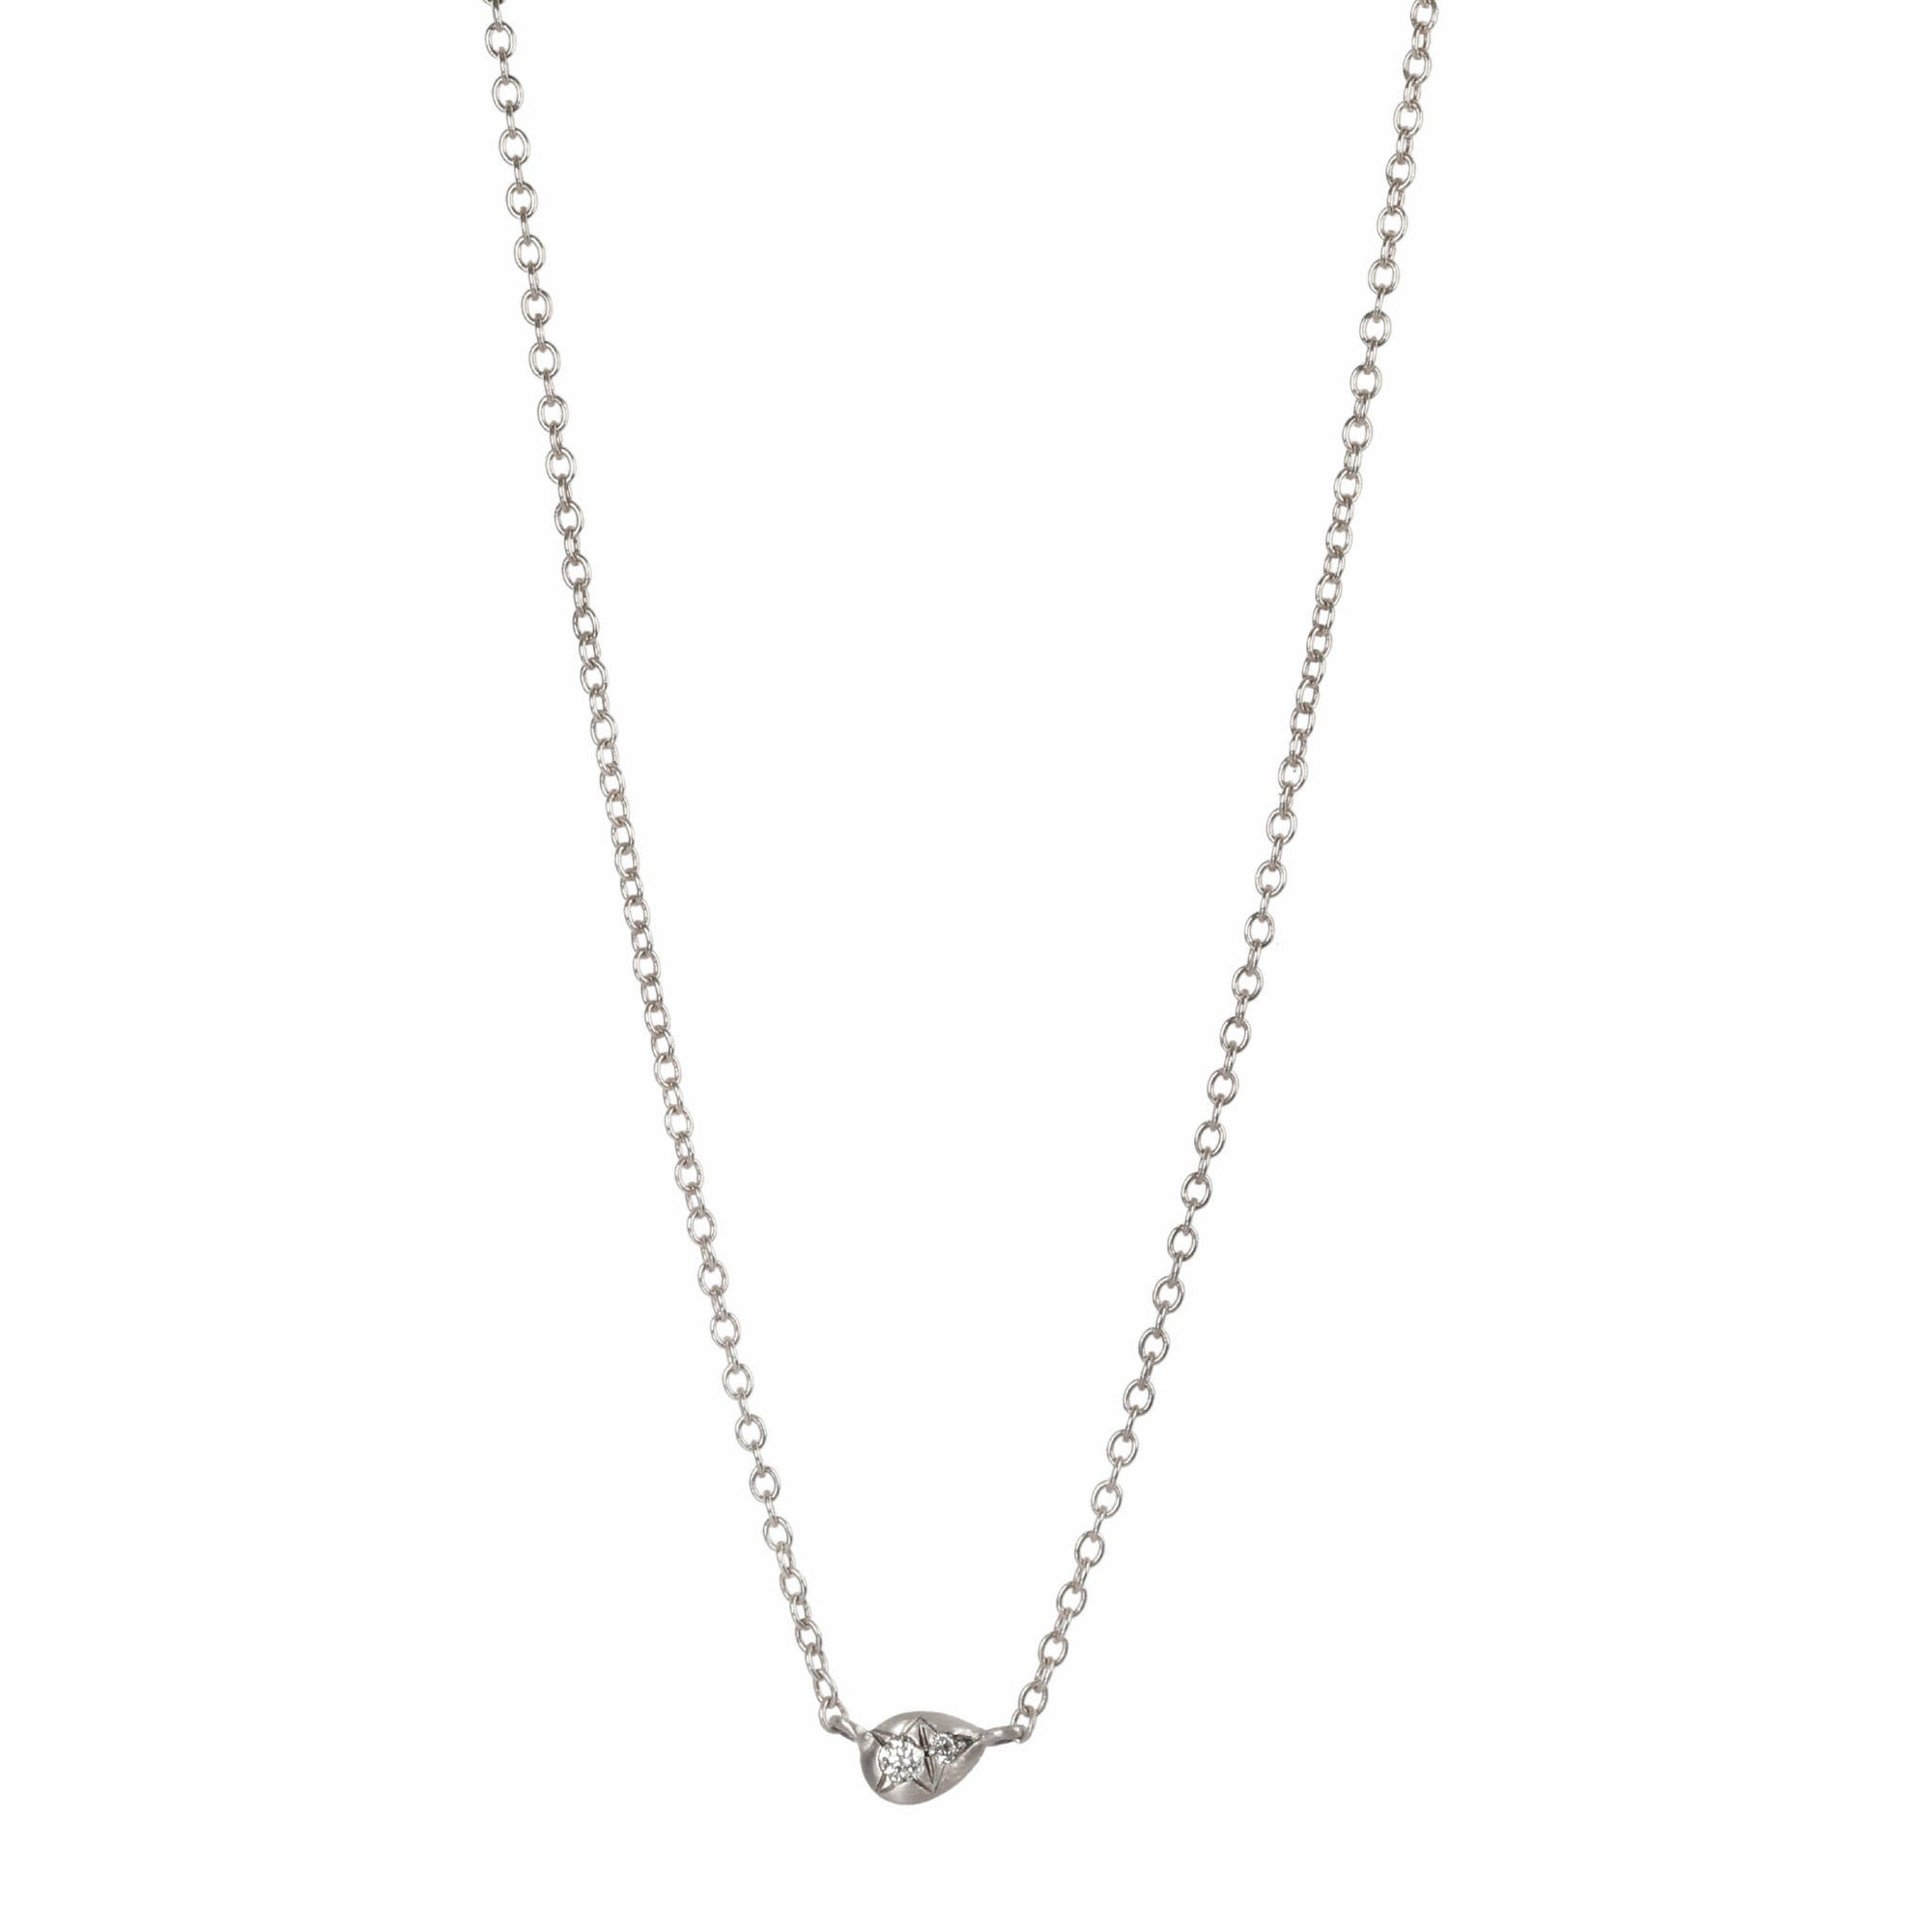 Sterling Silver Off-Set Pear-Shaped Disc Pendant Necklace with Two Star-Set Diamonds